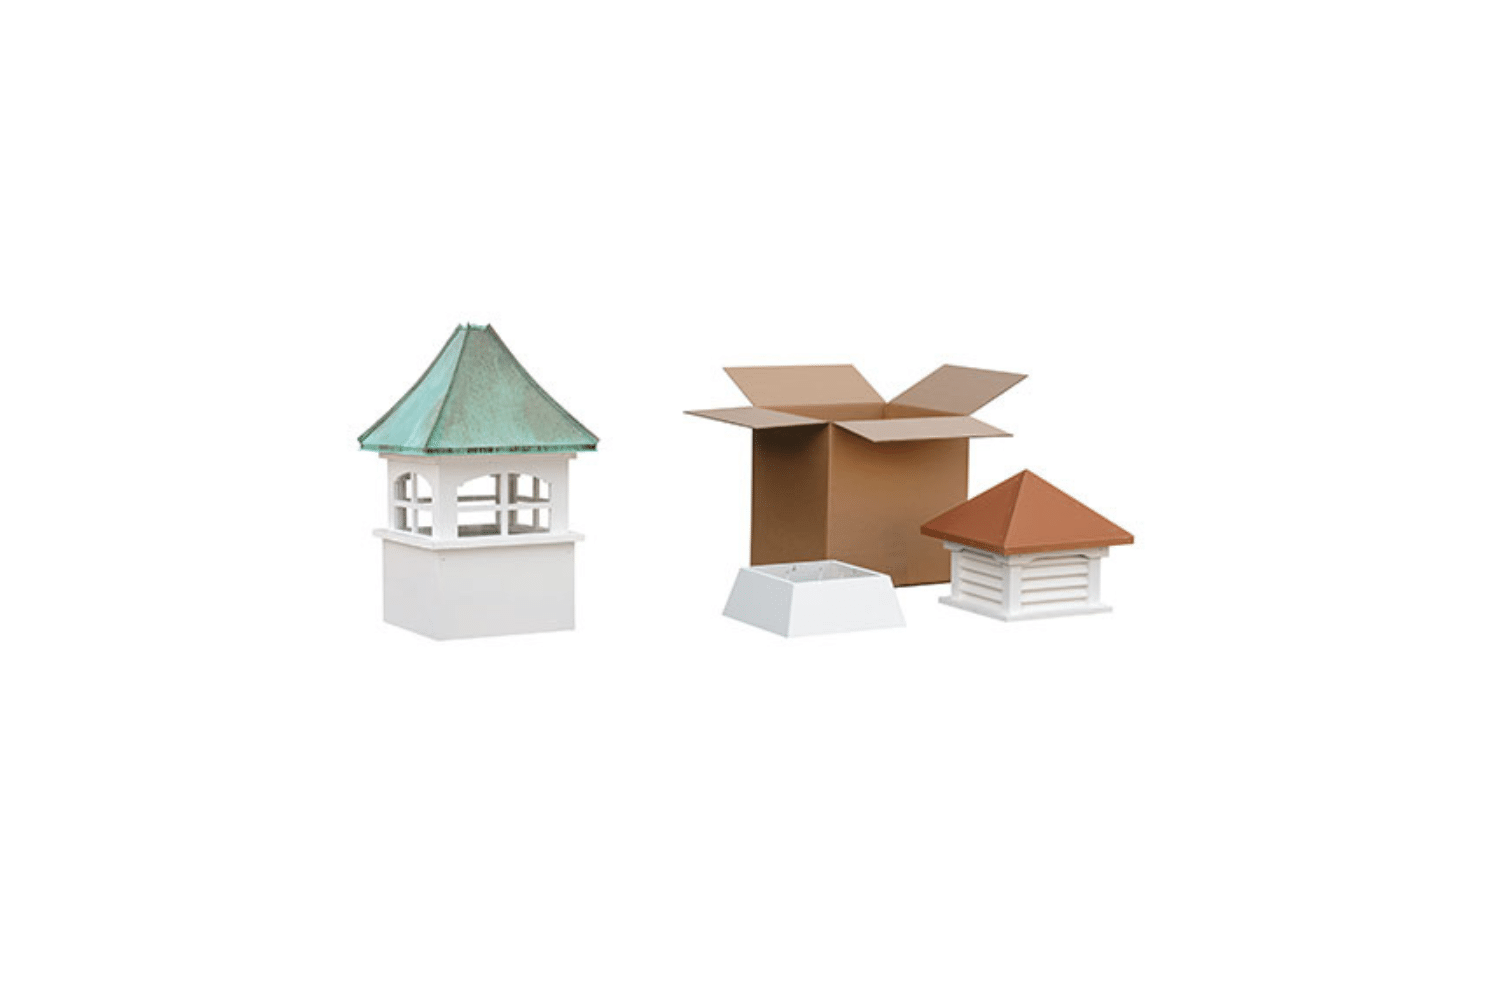 Cupola Roofs design